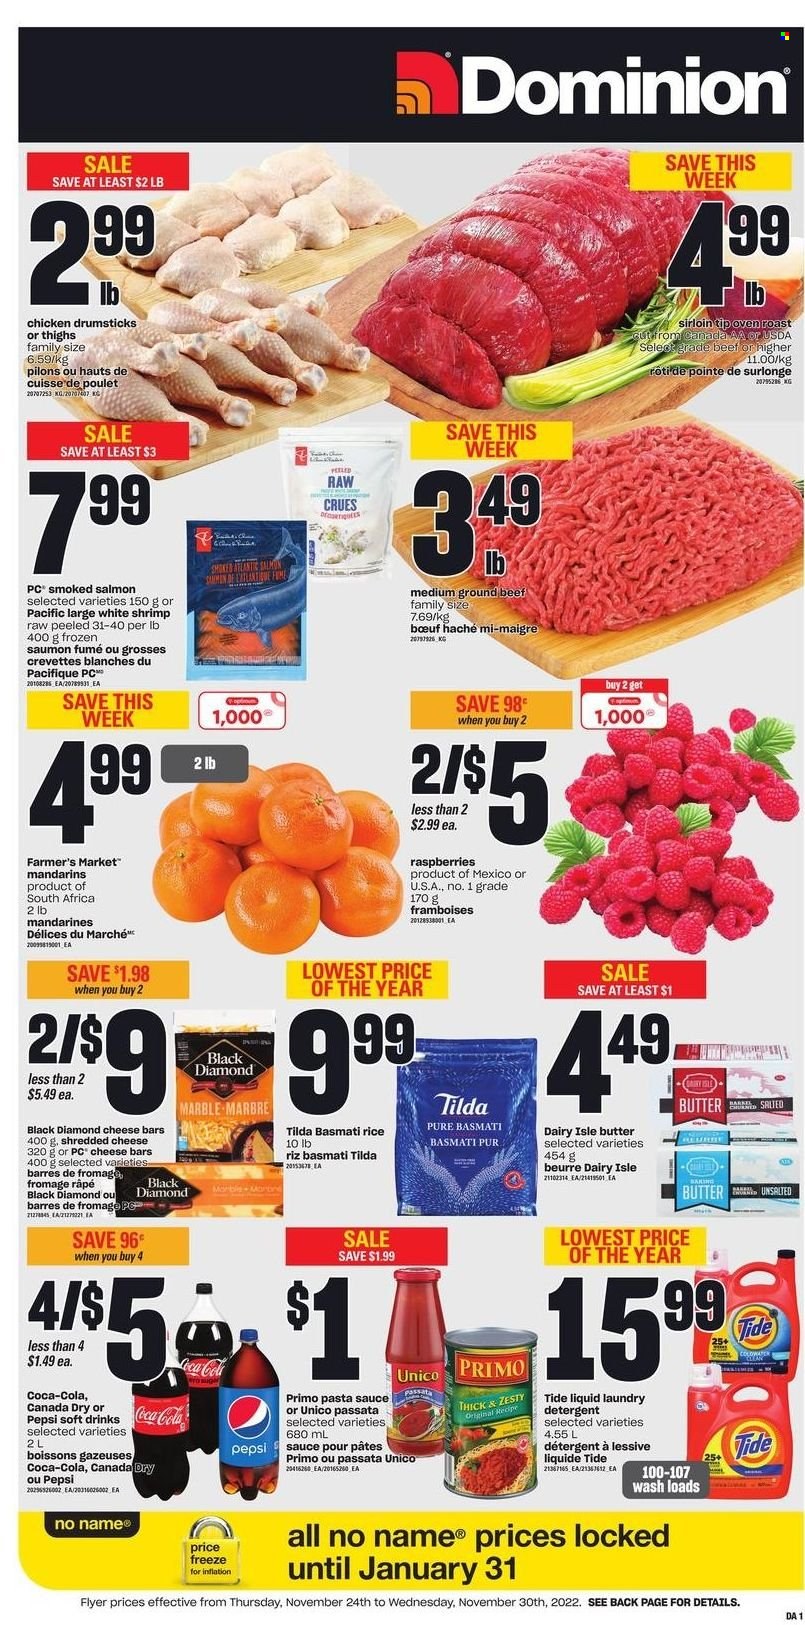 thumbnail - Dominion Flyer - November 24, 2022 - November 30, 2022 - Sales products - mandarines, salmon, smoked salmon, shrimps, No Name, pasta sauce, shredded cheese, butter, basmati rice, rice, Canada Dry, Coca-Cola, Pepsi, soft drink, chicken drumsticks, chicken, beef meat, ground beef, Tide, laundry detergent, detergent. Page 1.